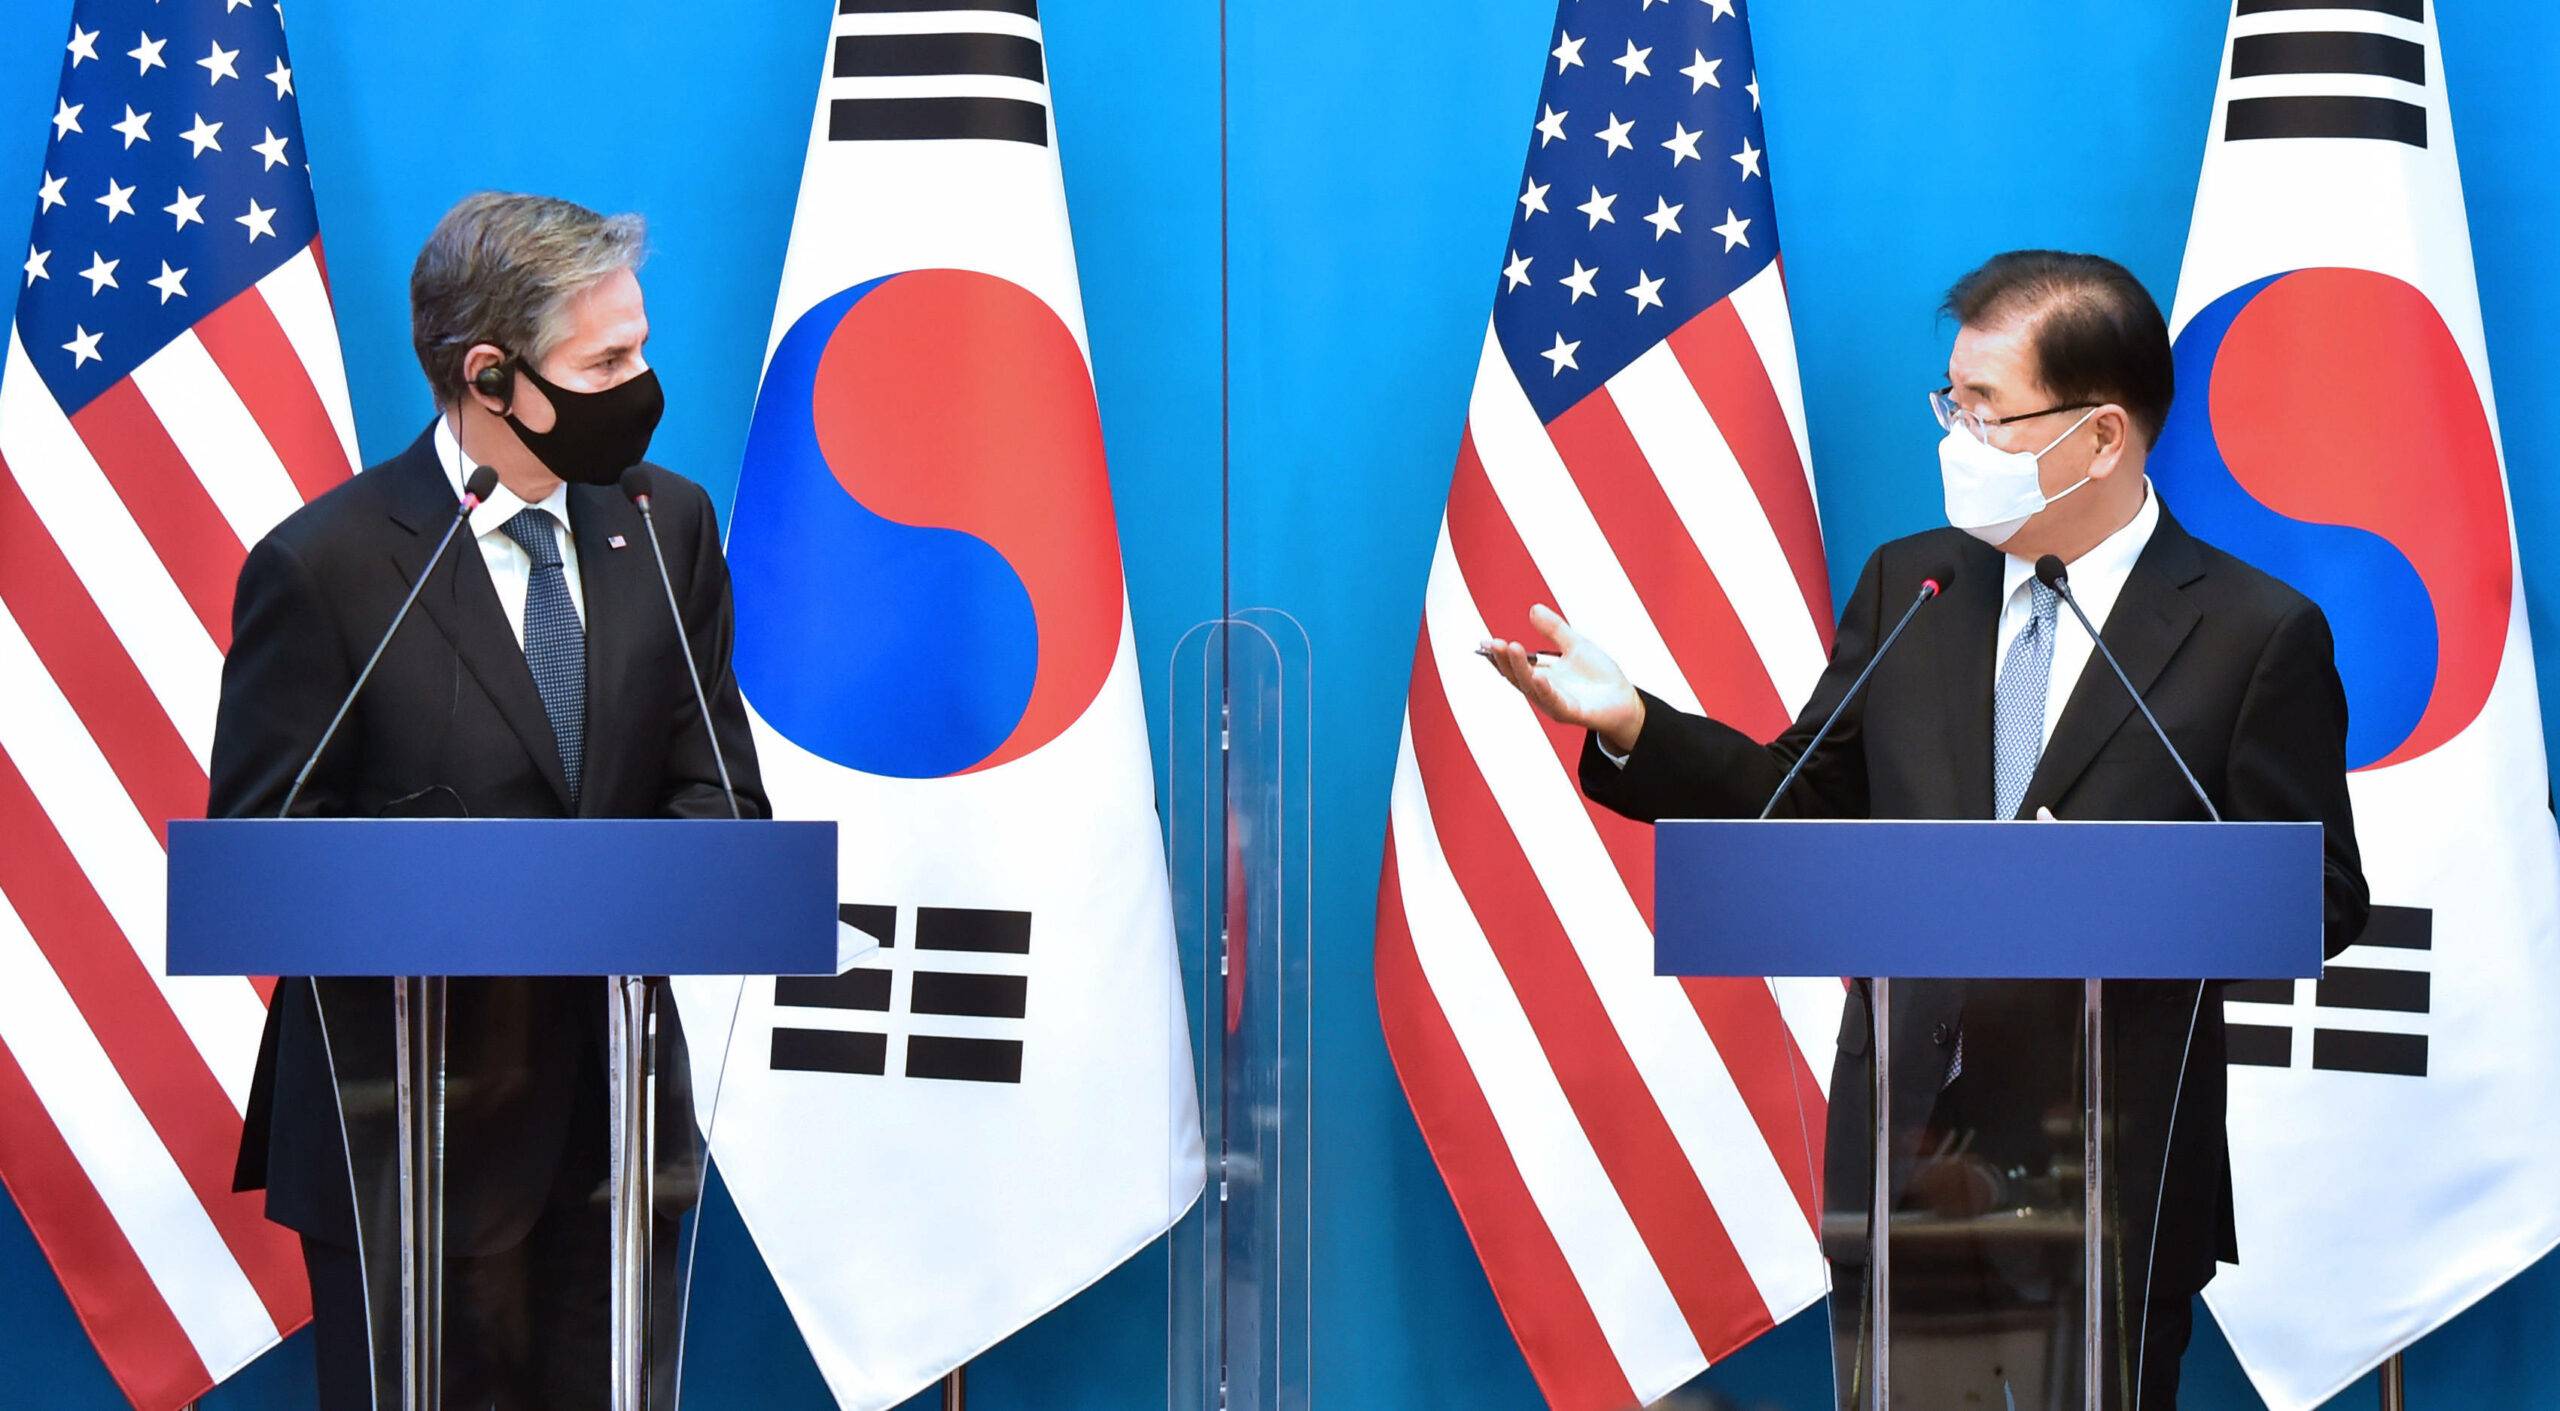 S. Korea-U.S. joint news conference South Korean Foreign Minister Chung Eui-yong (R) and his U.S. counterpart Antony Blinken hold a joint news conference after their meeting at the foreign ministry in Seoul on March 18, 2021. (Pool photo) (Yonhap)/2021-03-18 14:20:20/ 
 Photo via Newscom/yonphotos183973/Yonhap News/Newscom/SIPA/2103180625